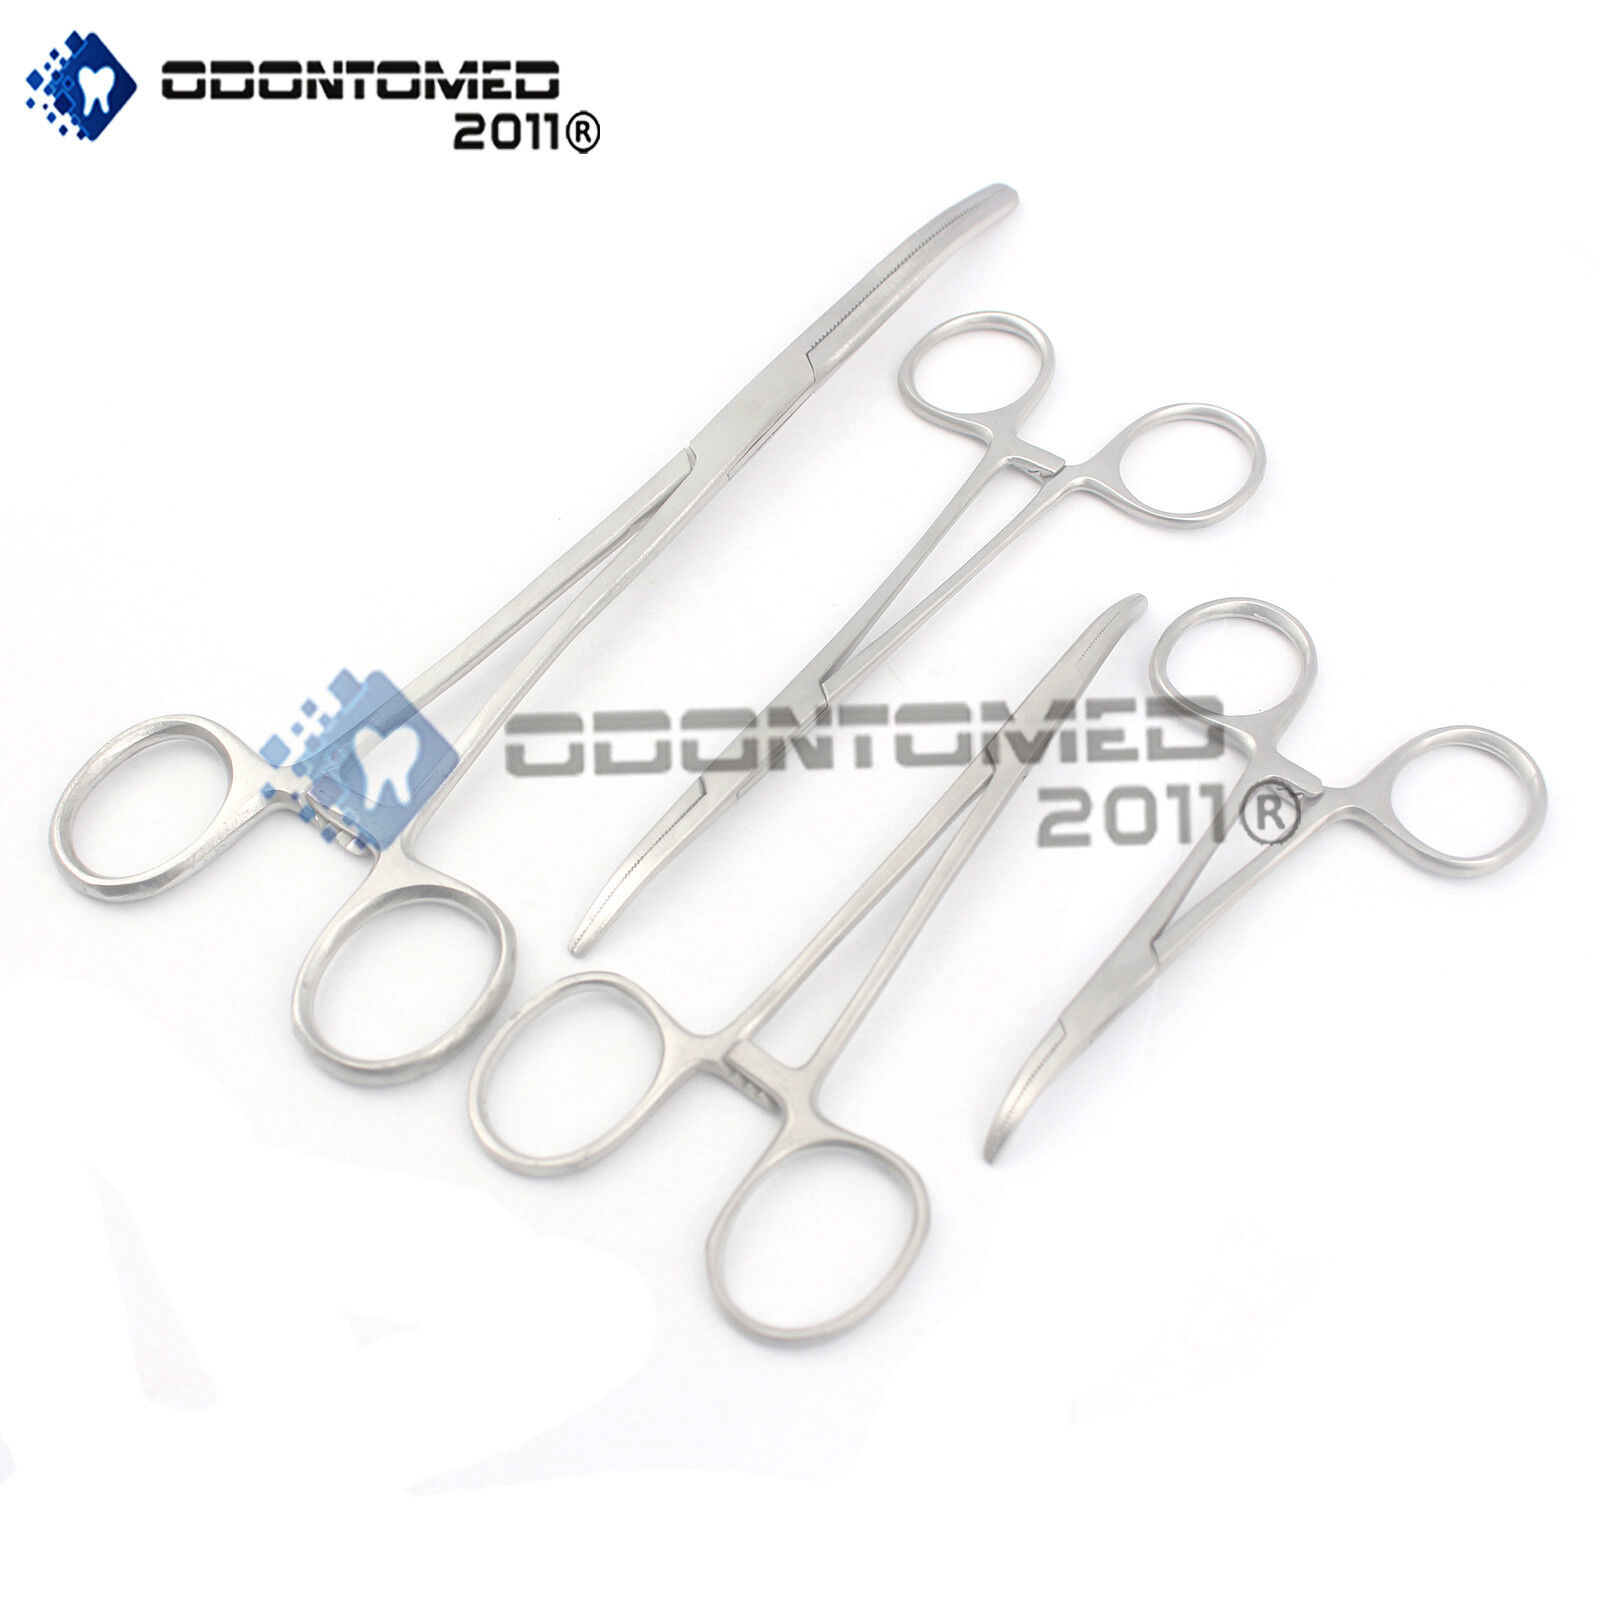 Hemostats / Locking Forceps 4 Pc Set 3-1/2" - 8" Curved ODM Does Not Apply